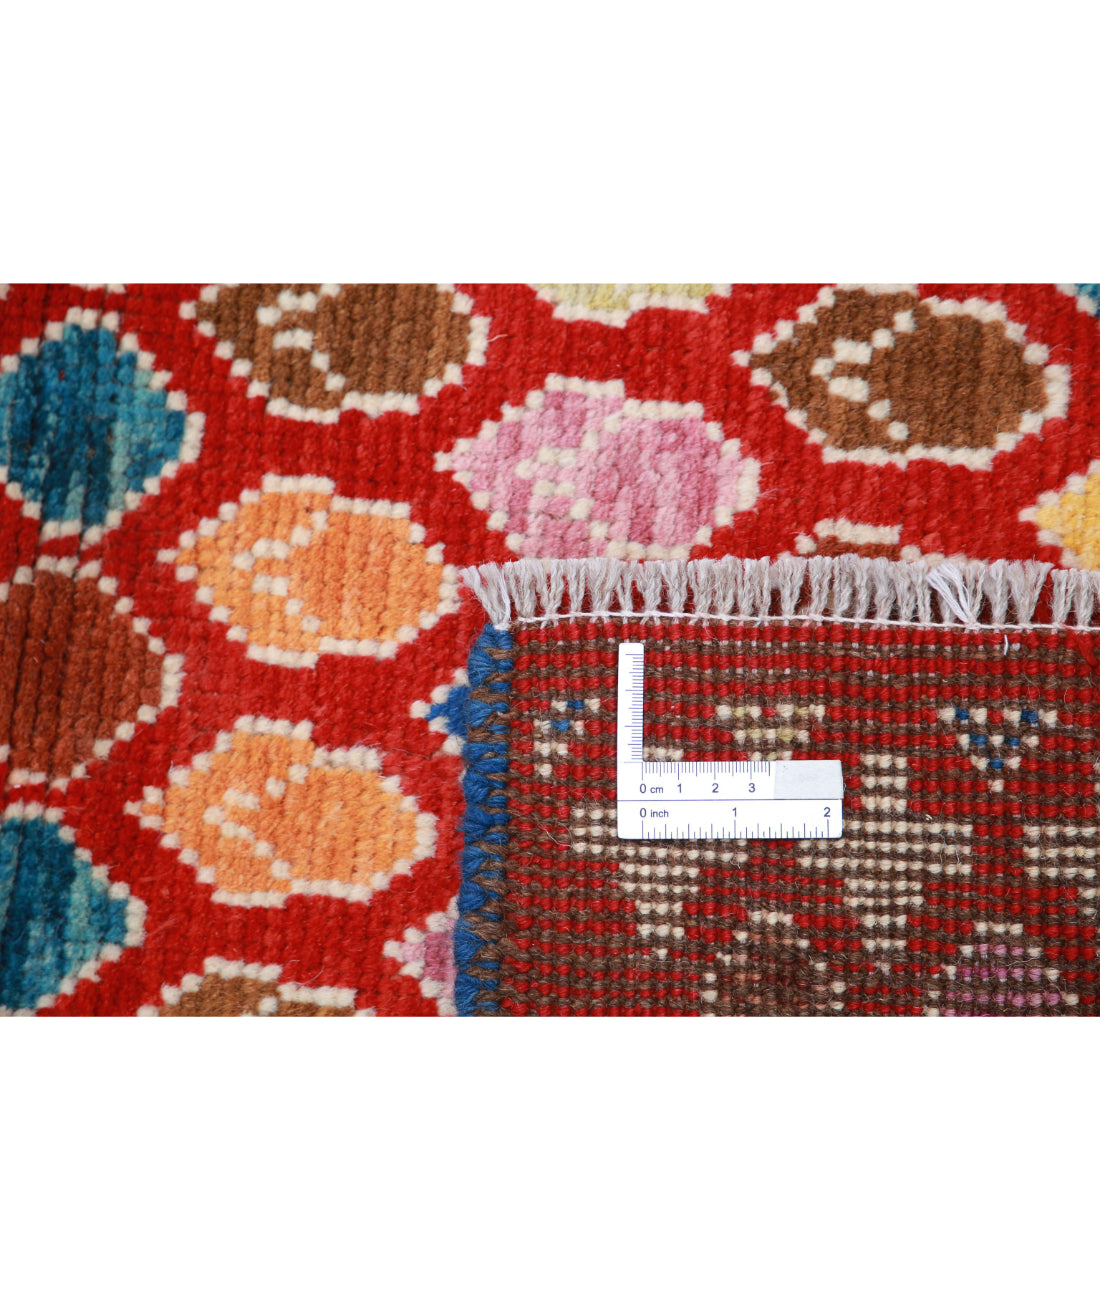 Revival 2'9'' X 4'0'' Hand-Knotted Wool Rug 2'9'' x 4'0'' (83 X 120) / Red / Multi